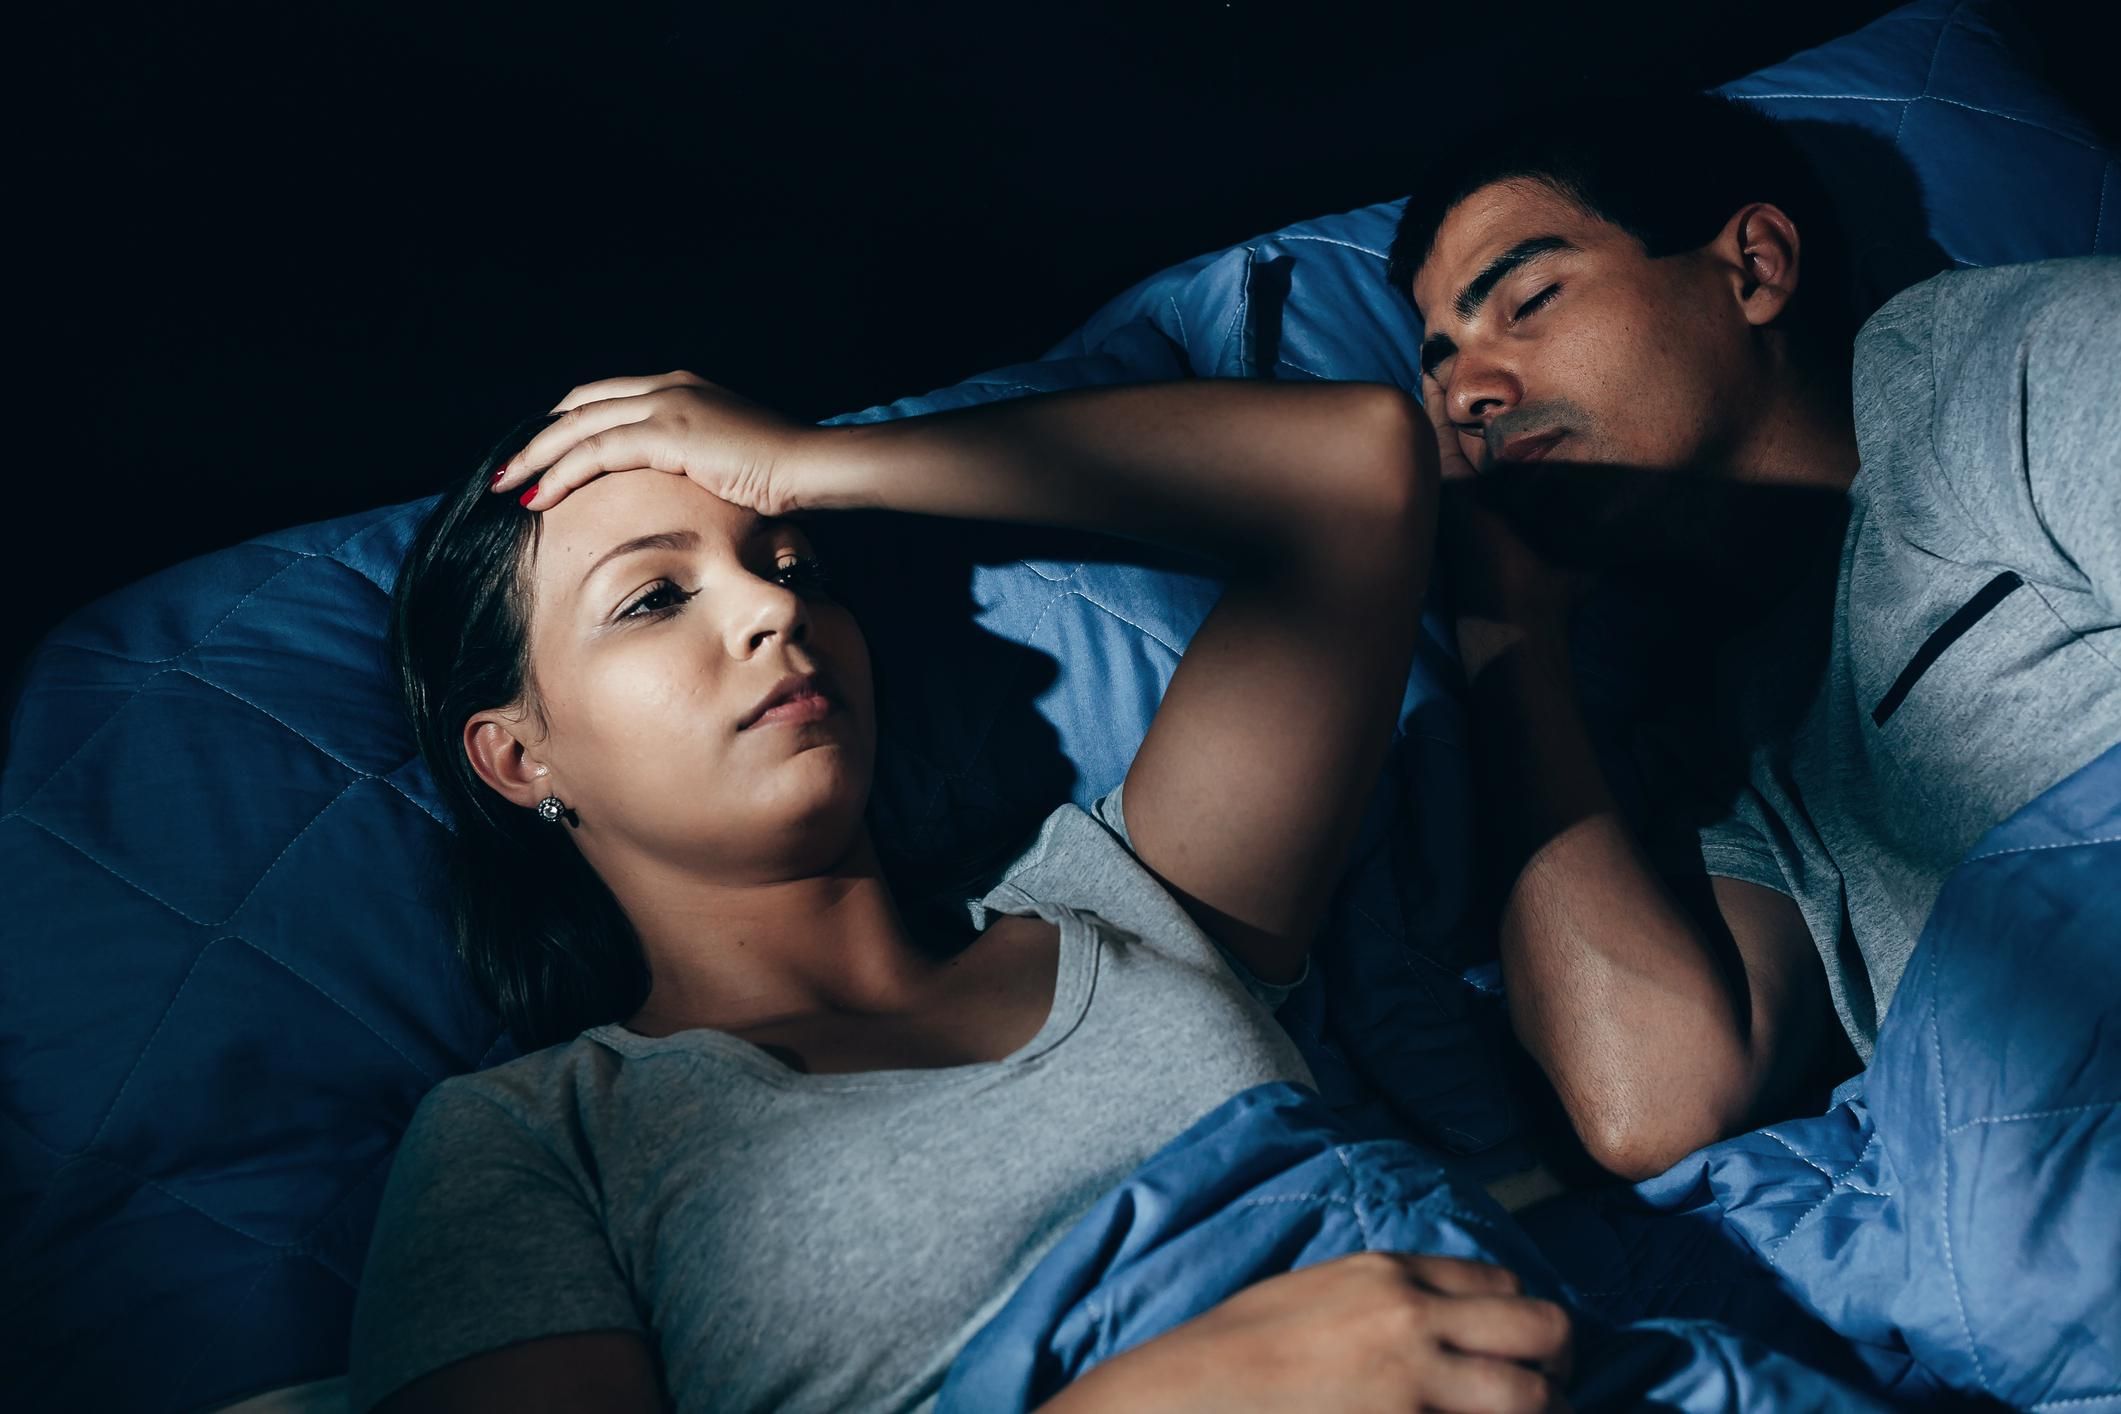 Clinically Speaking: Questions and Answers About Insomnia